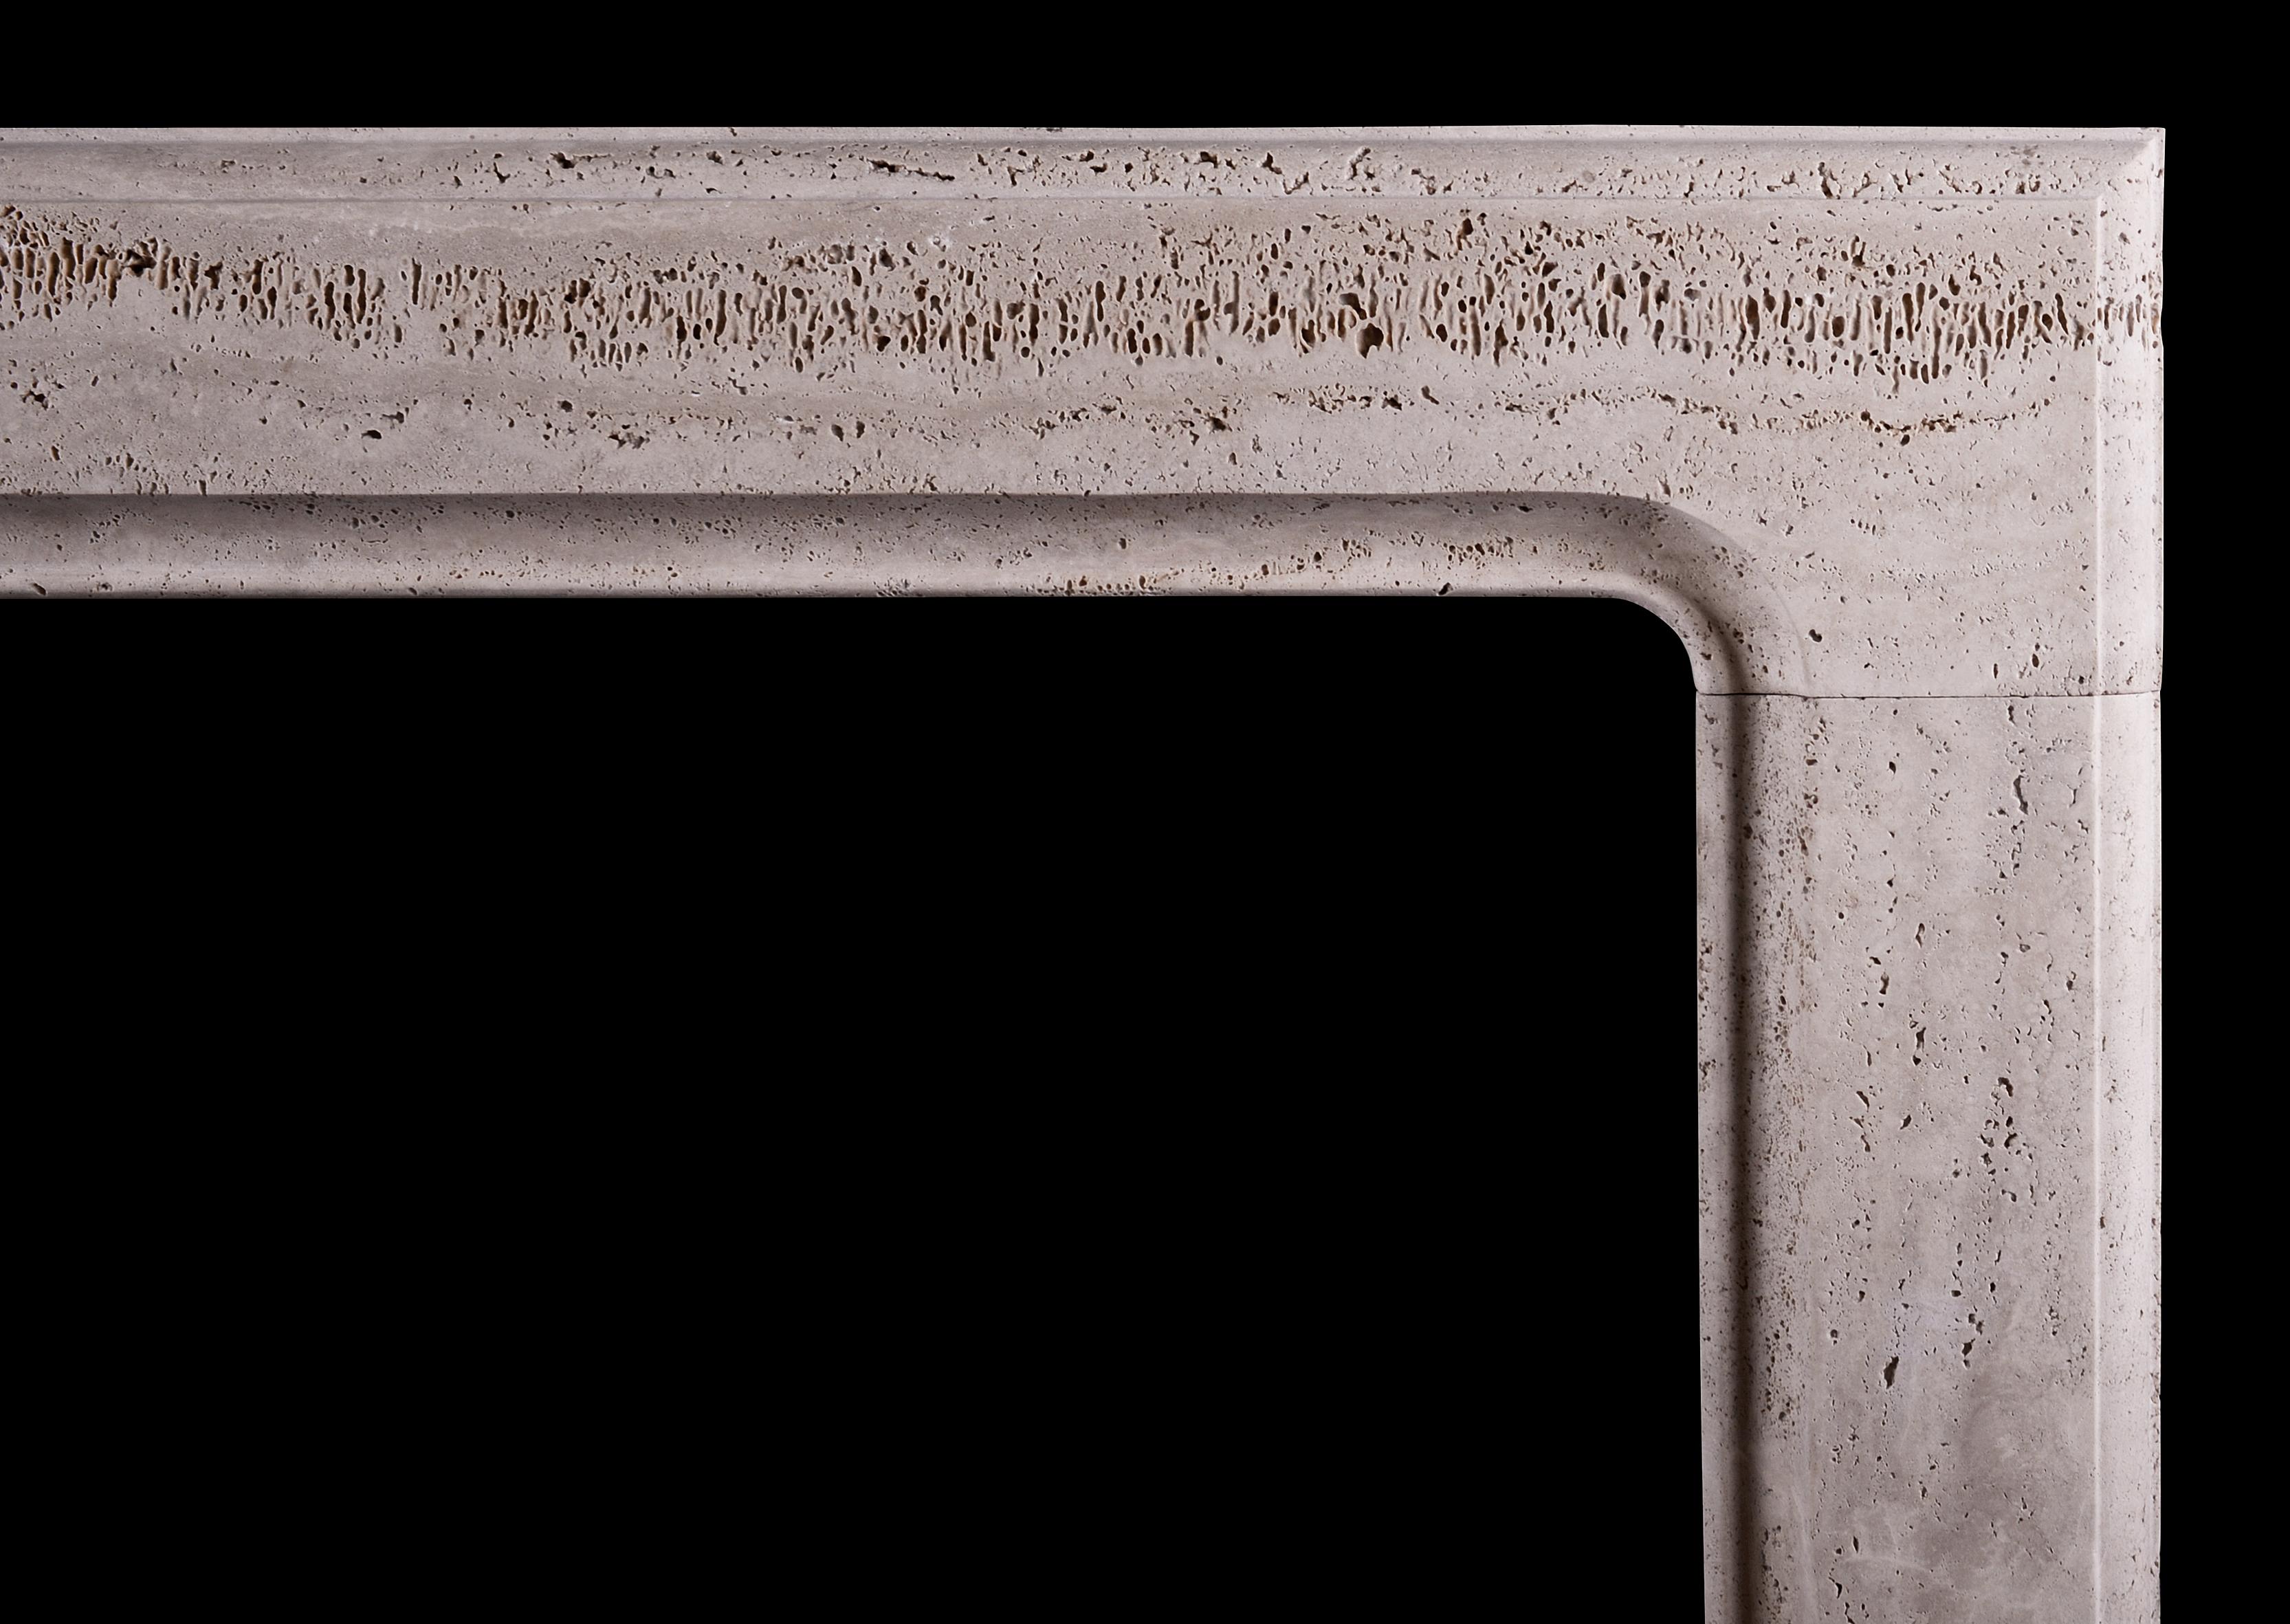 An architectural bolection fireplace of small scale with moulded frieze and jambs. Made in a rustic Italian travertine stone, currently unfilled. English, modern.

NB. May be subject to an extended lead time, please enquire for more info.